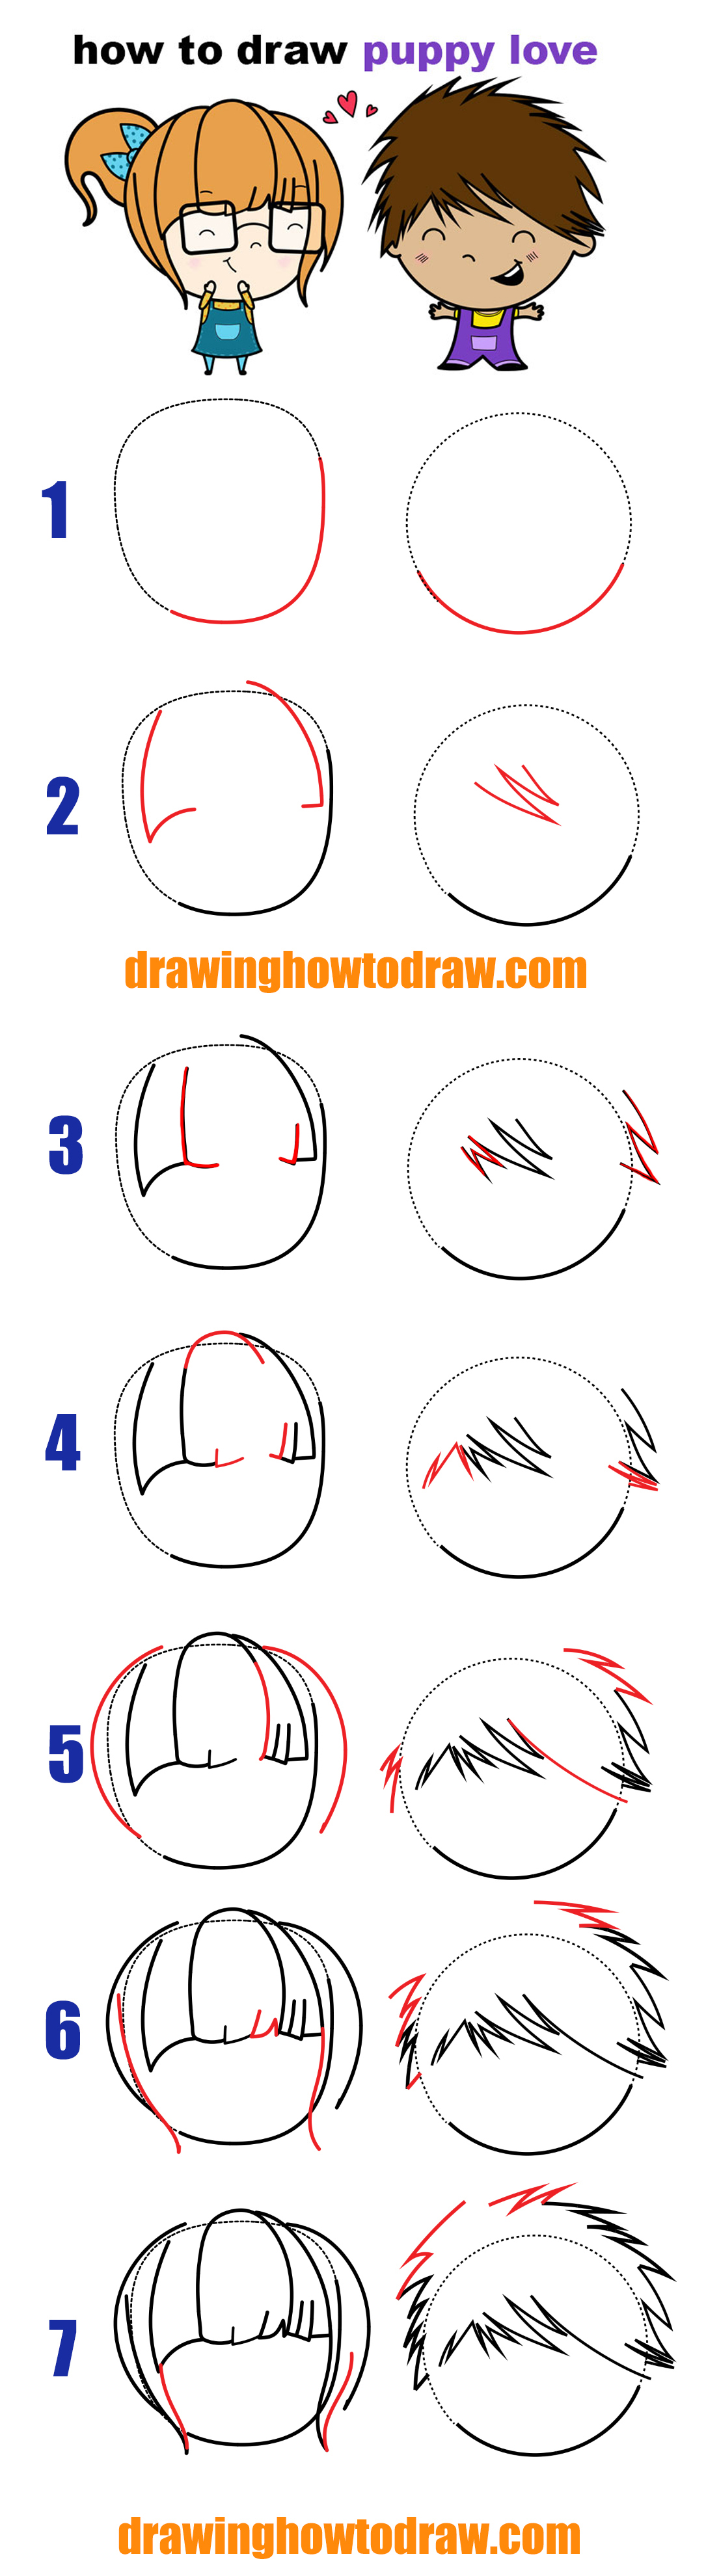 How To Draw A Boy And Girl In Love With Easy Step By Step Drawing Tutorial For Kids How To Draw Step By Step Drawing Tutorials